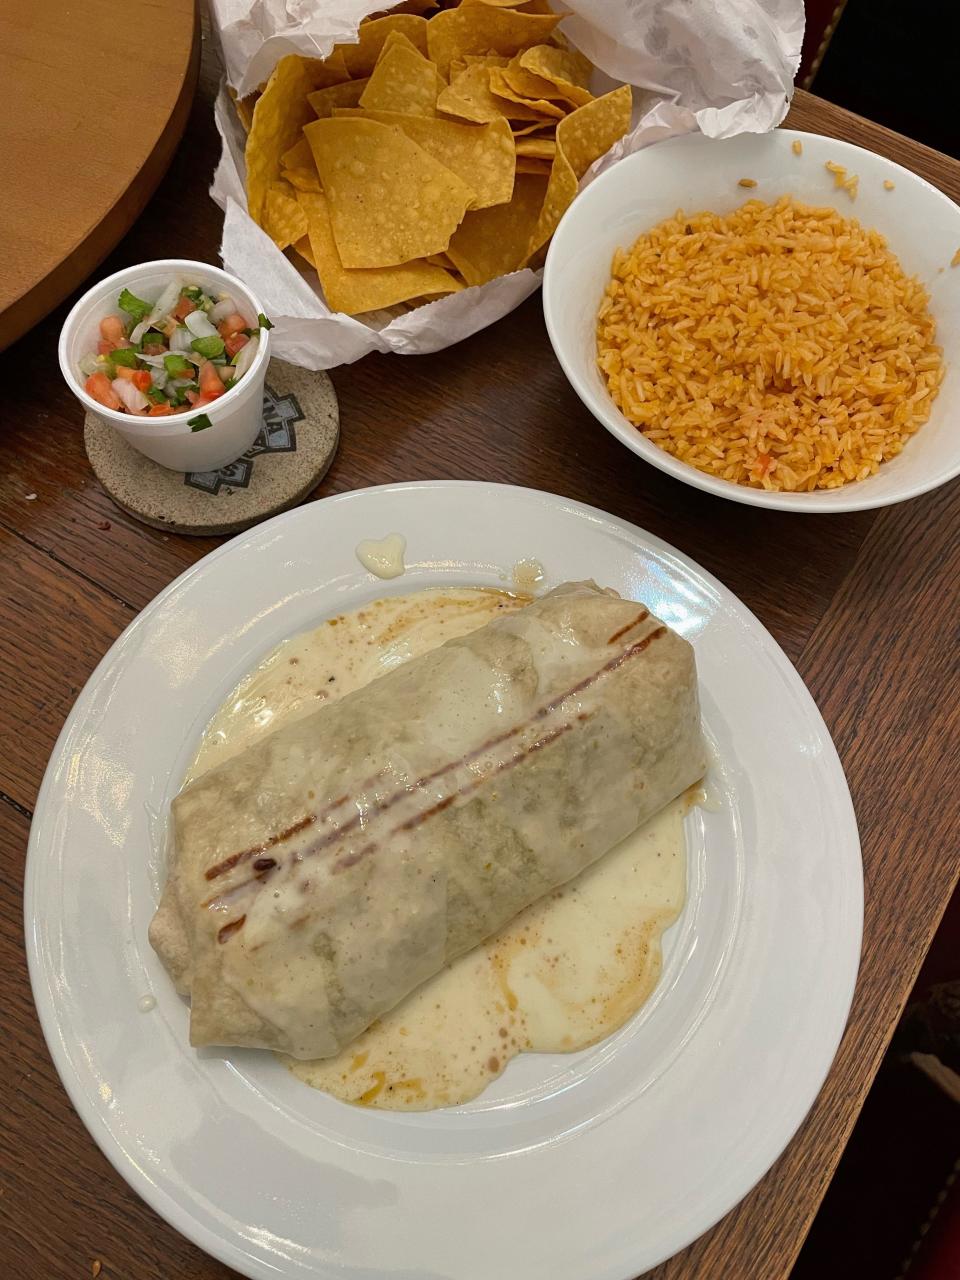 A 54-year-old Fayetteville pharmacist eats a burrito with pico de gallo, chips and rice from MiCasita Mexican Restaurant, a regional chain.